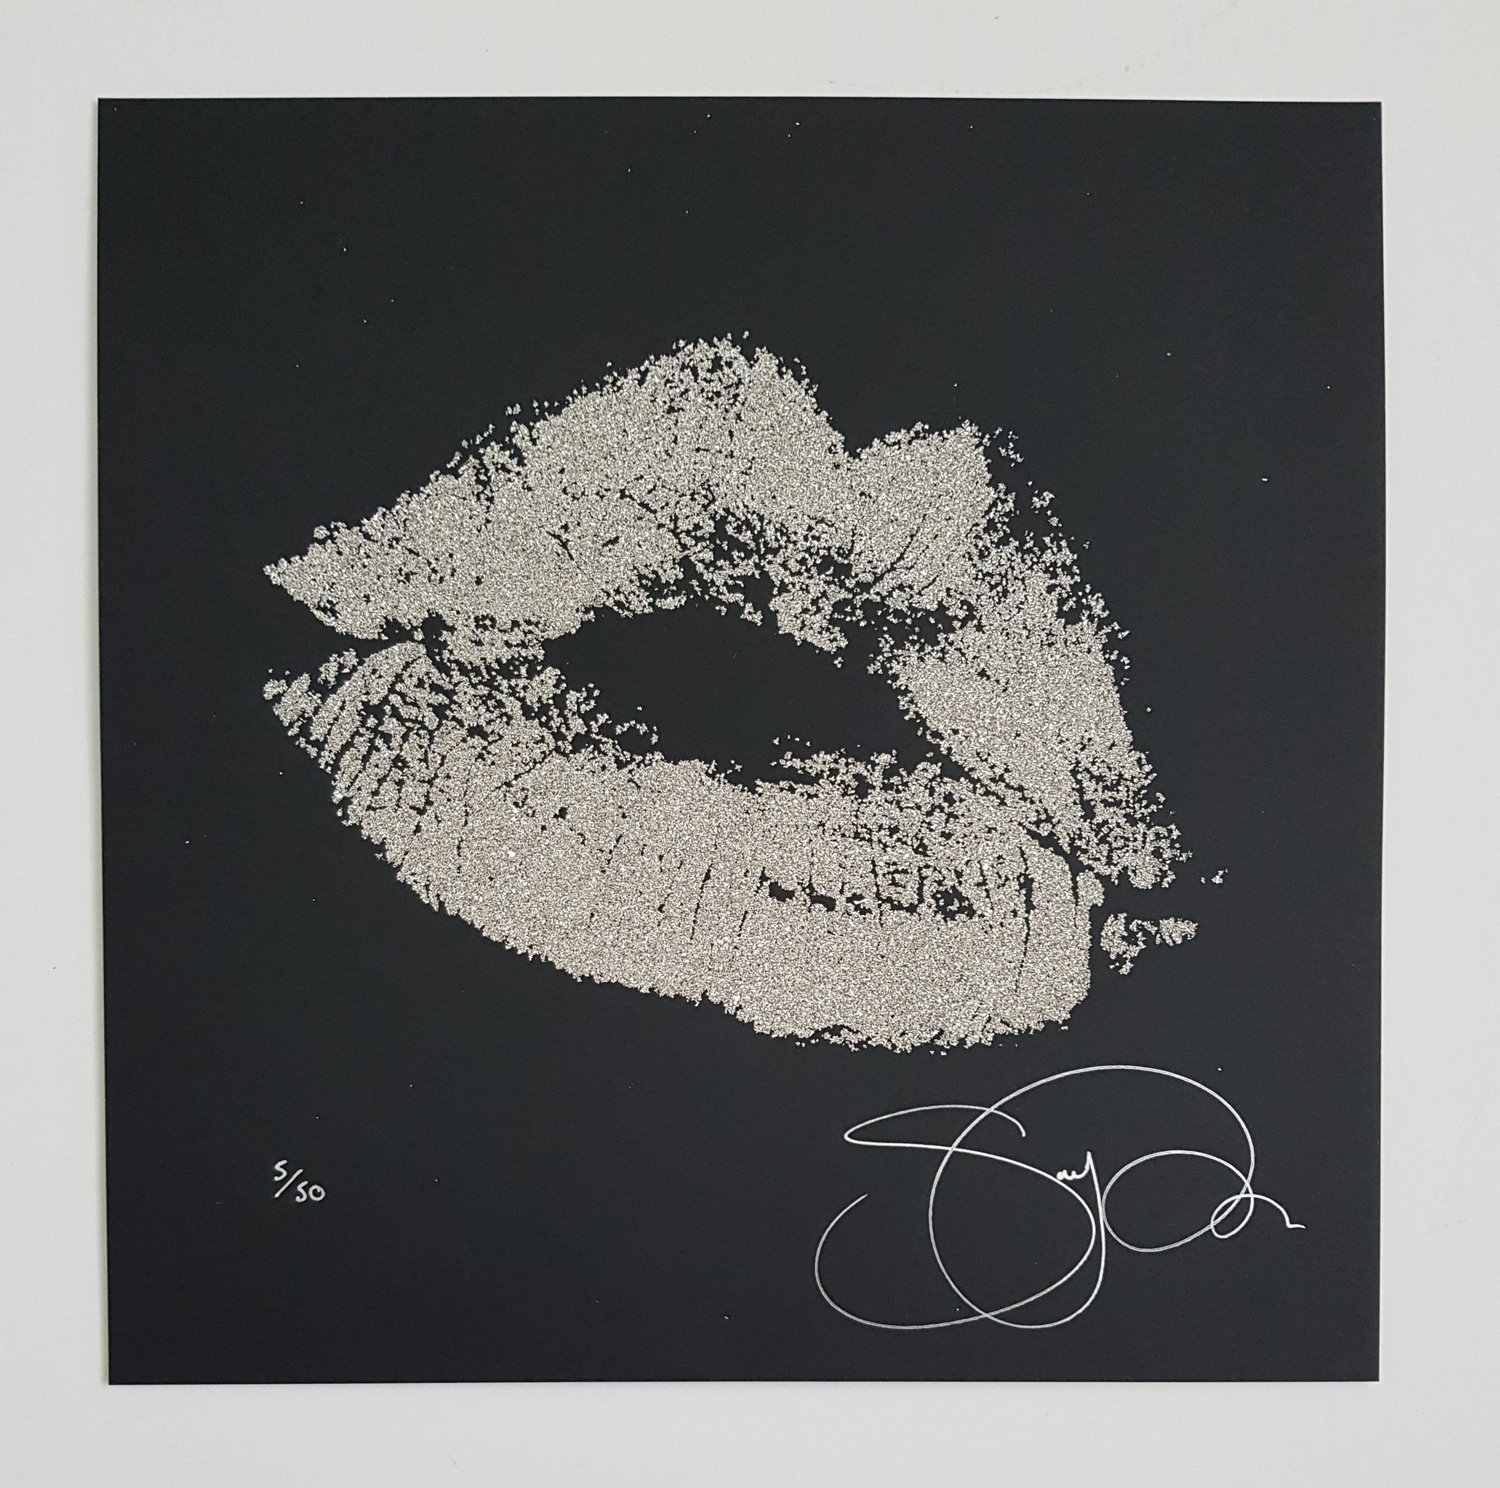 Image of SARA POPE "KISS SILVER" - LIMITED EDITION PRINT 50 - 30CM X 30CM